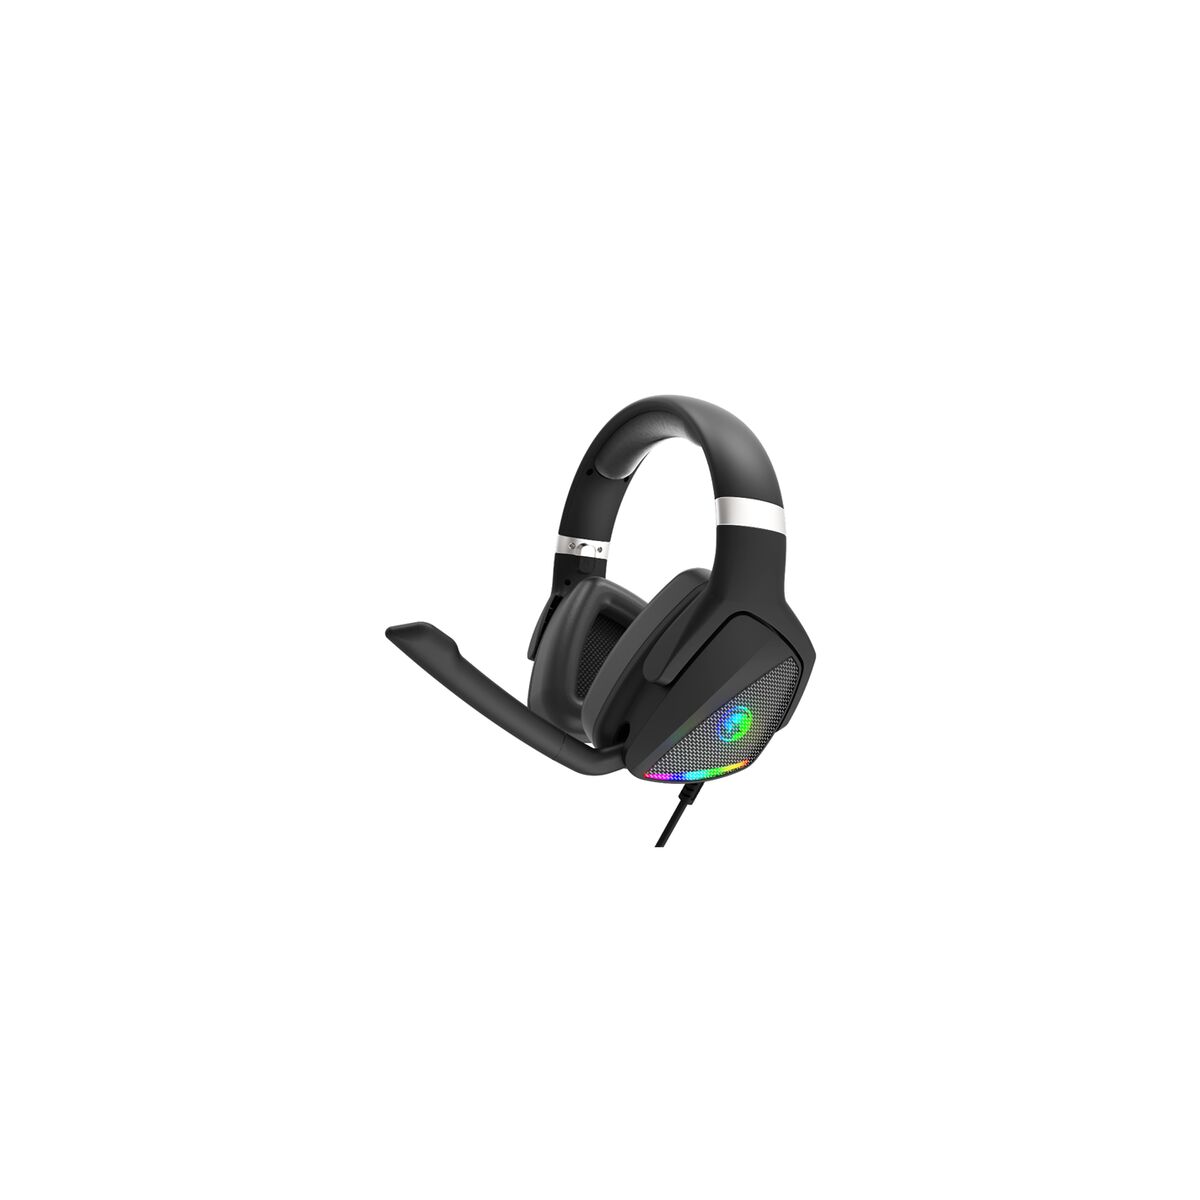 Headphones with Microphone Scorpion KG9068 Black, Scorpion, Electronics, Mobile communication and accessories, headphones-with-microphone-scorpion-kg9068-black, Brand_Scorpion, category-reference-2609, category-reference-2642, category-reference-2847, category-reference-t-19653, category-reference-t-21312, category-reference-t-4036, category-reference-t-4037, computers / peripherals, Condition_NEW, entertainment, gadget, music, office, Price_50 - 100, telephones & tablets, Teleworking, RiotNook